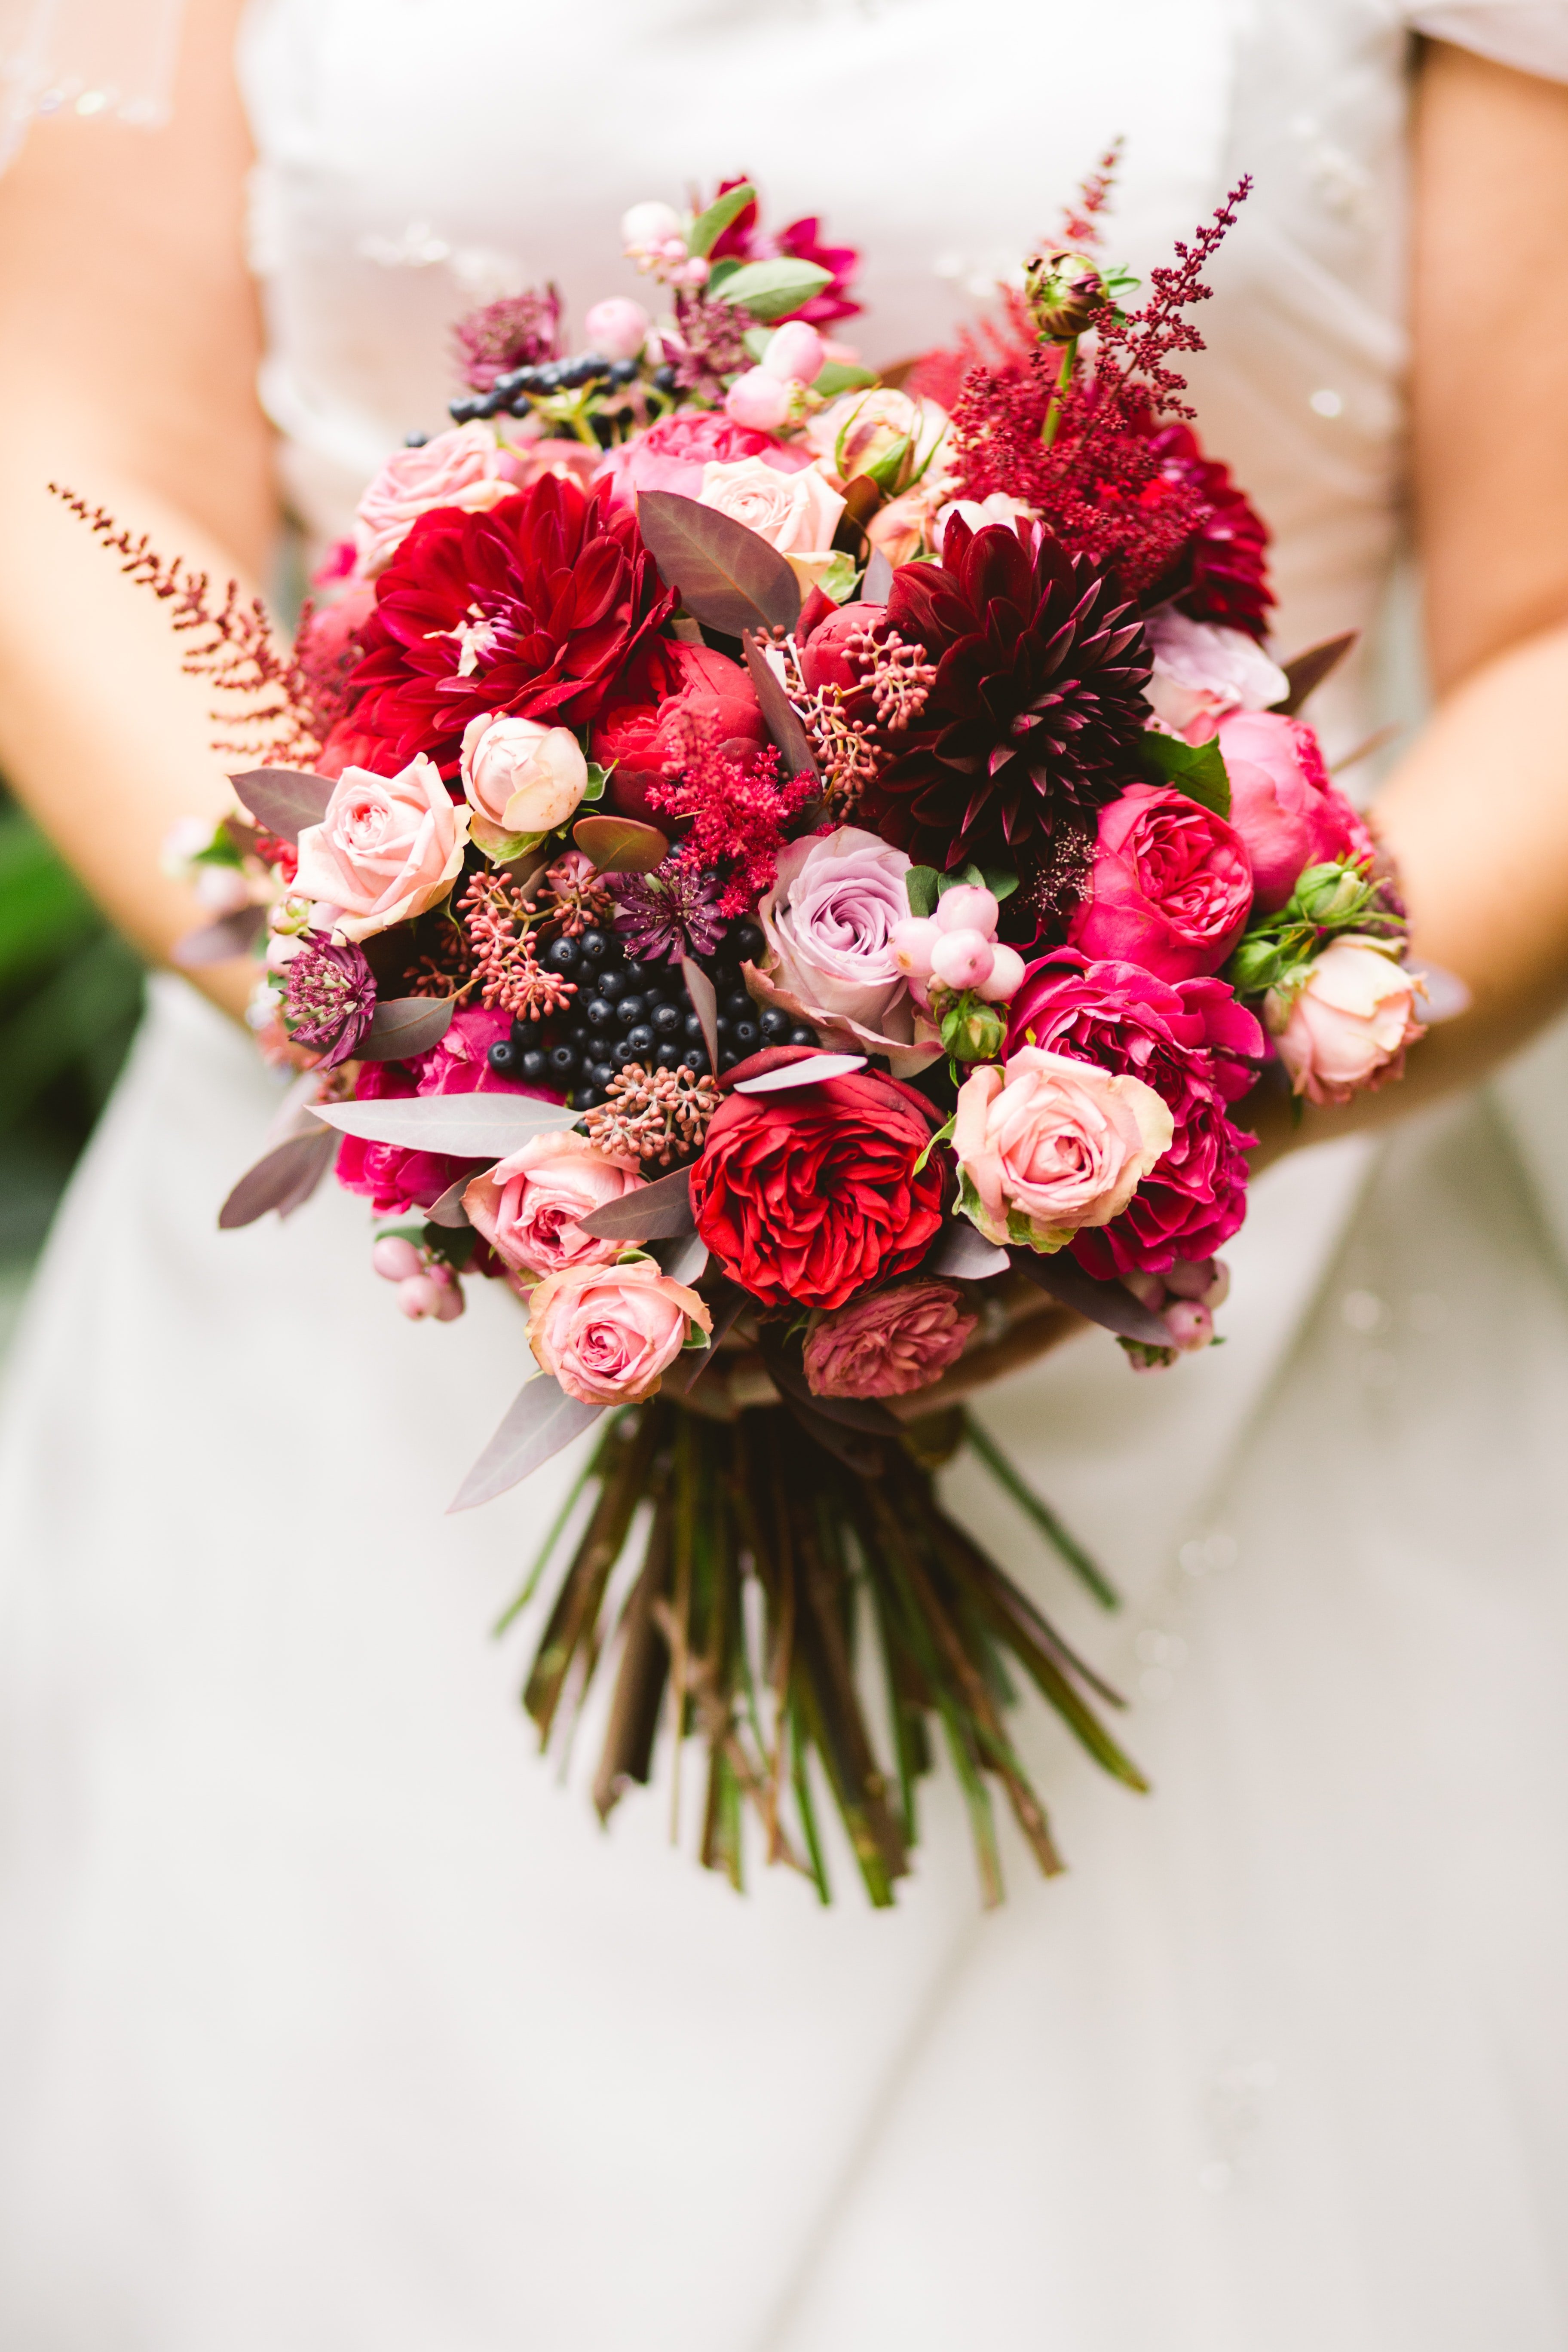 I hated to see the flower bouquet in Mary's hand | Photo: Unsplash